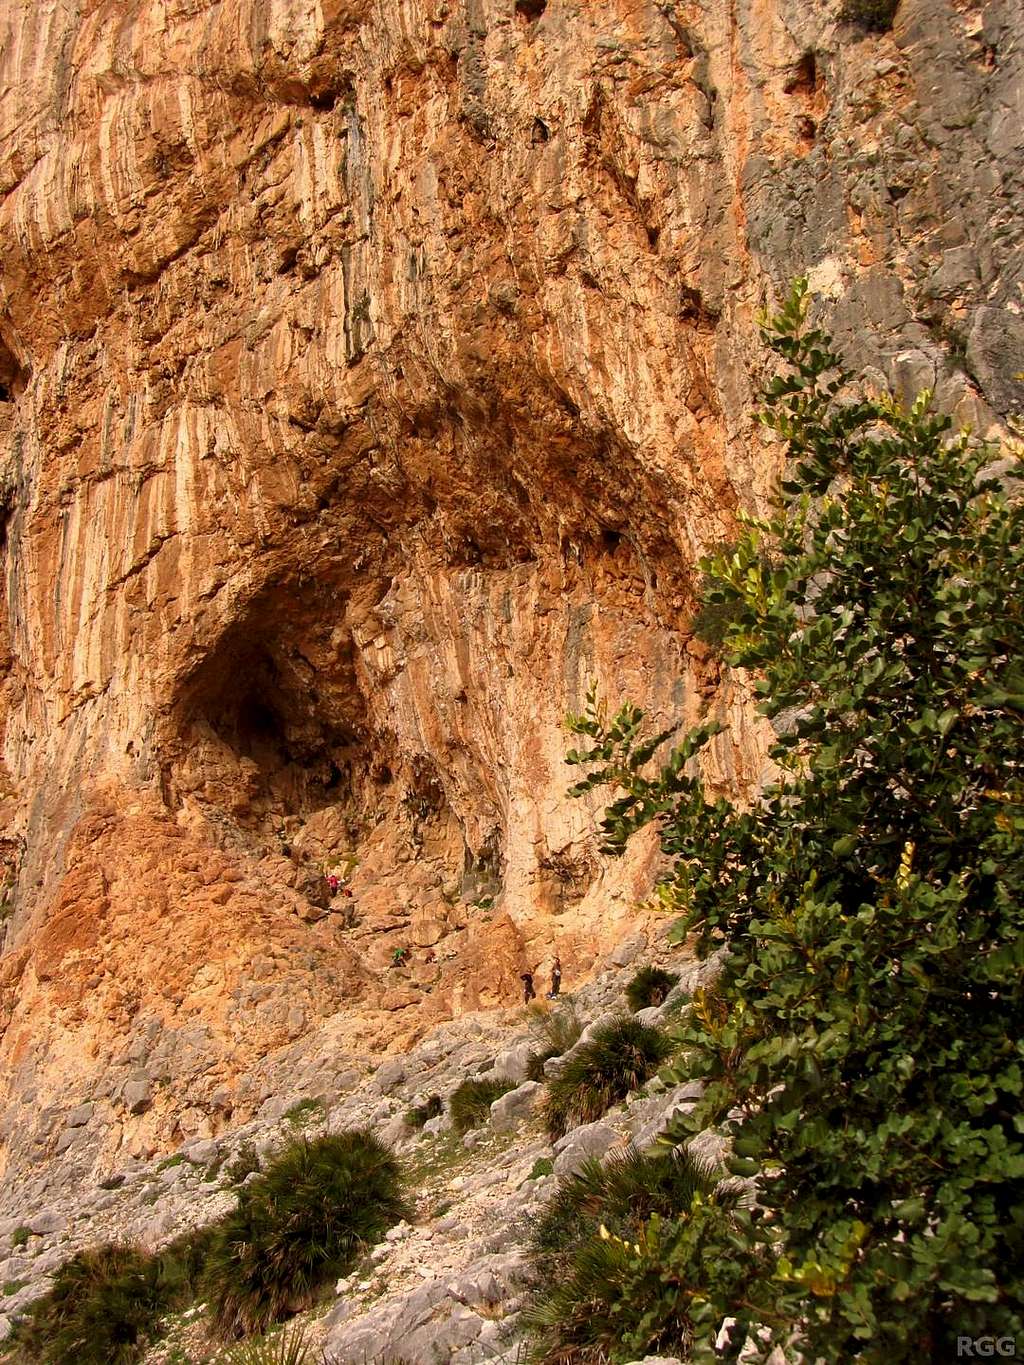 The big cave at Poema de Roca - check out the climbers to get an idea of its size